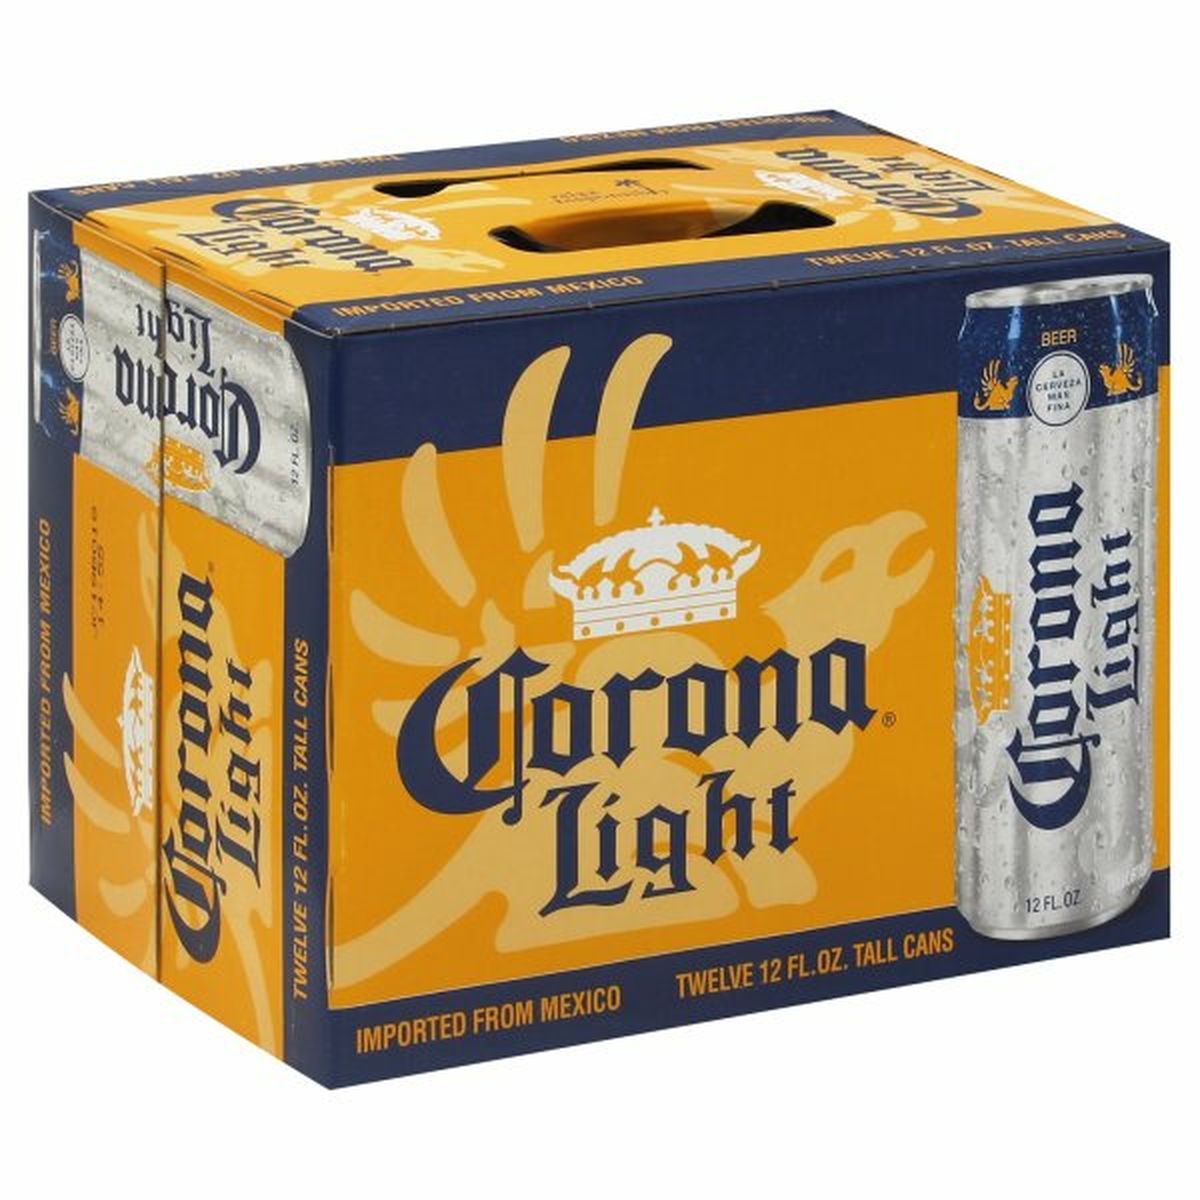 Calories in Corona Light Light Mexican Lager Beer Cans 12/12 oz slim cans